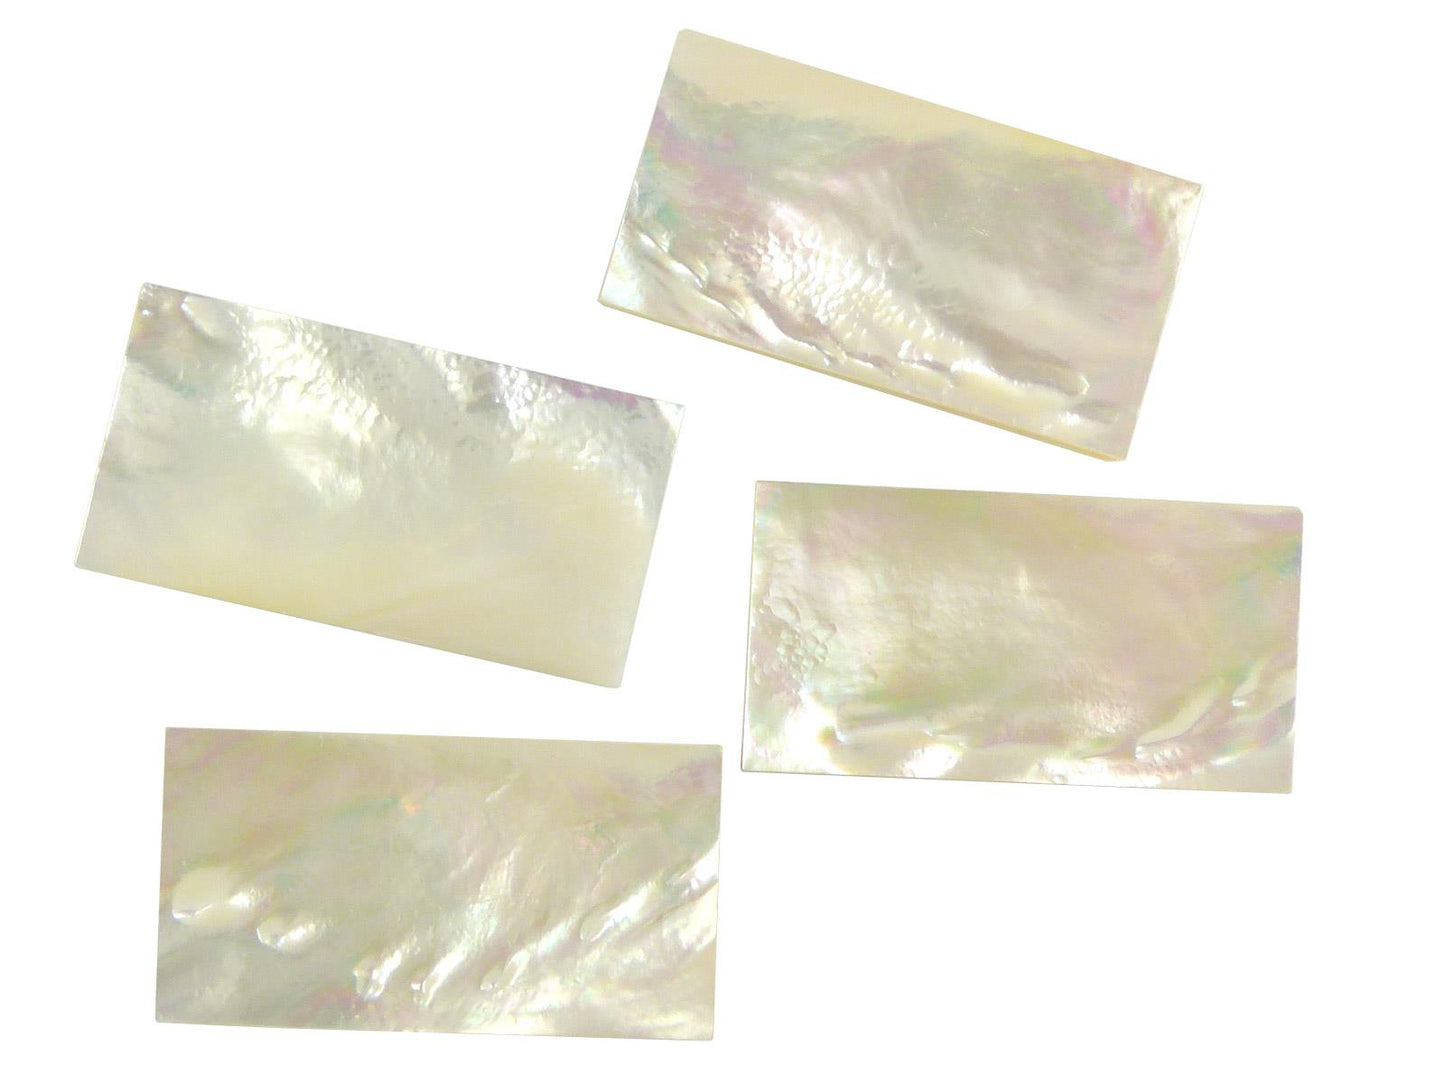 Incudo White Mother of Pearl Inlay Blank - 42x22x2mm (1.7x0.87x0.08")